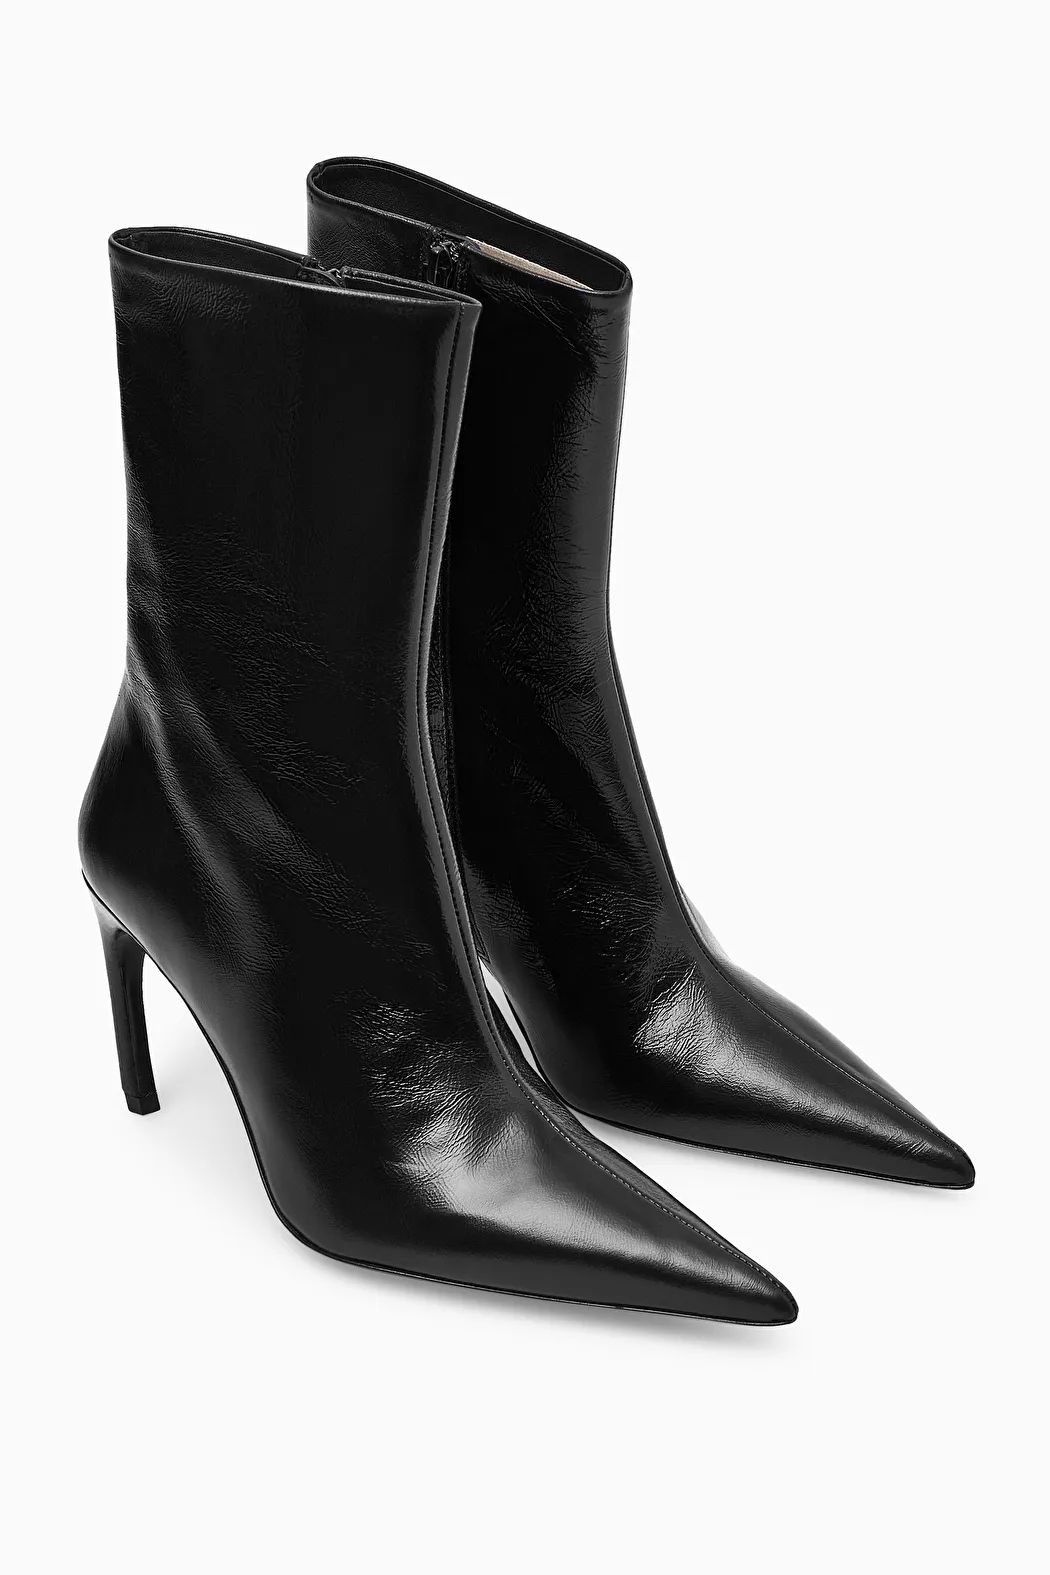 POINTED PATENT-LEATHER ANKLE BOOTS - BLACK - COS | COS UK